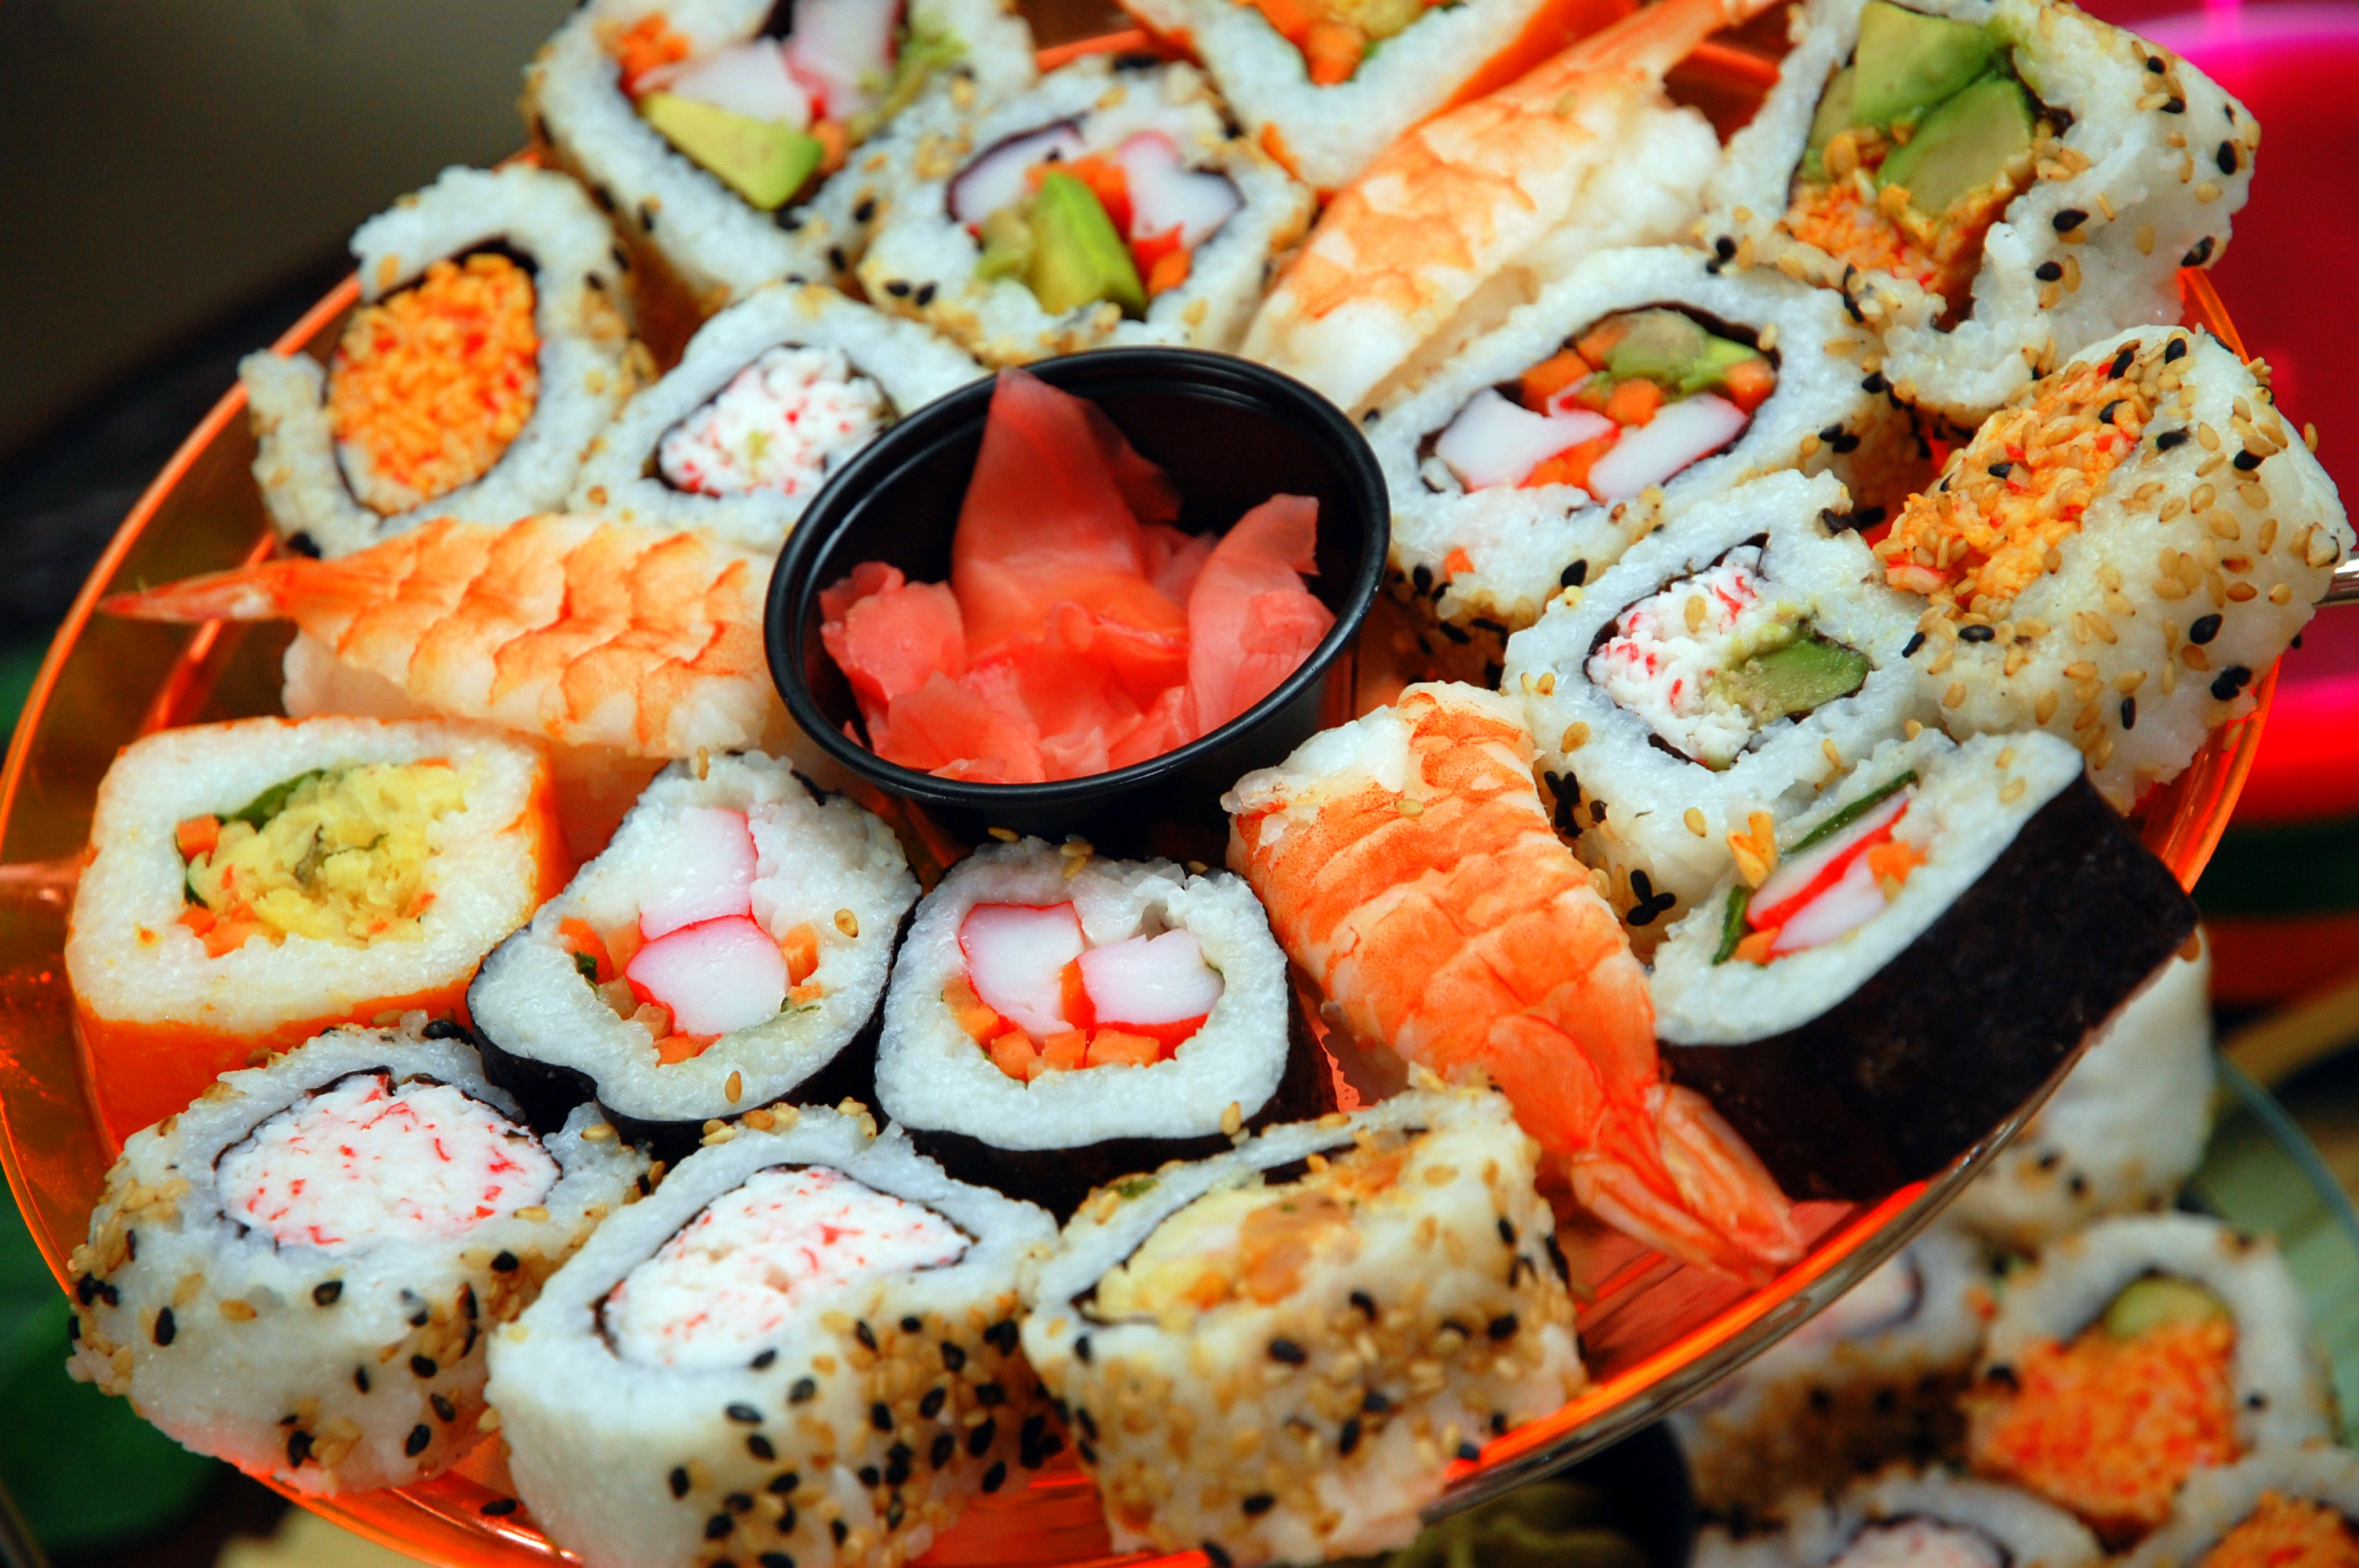 How to Eat Sushi The Healthy Way